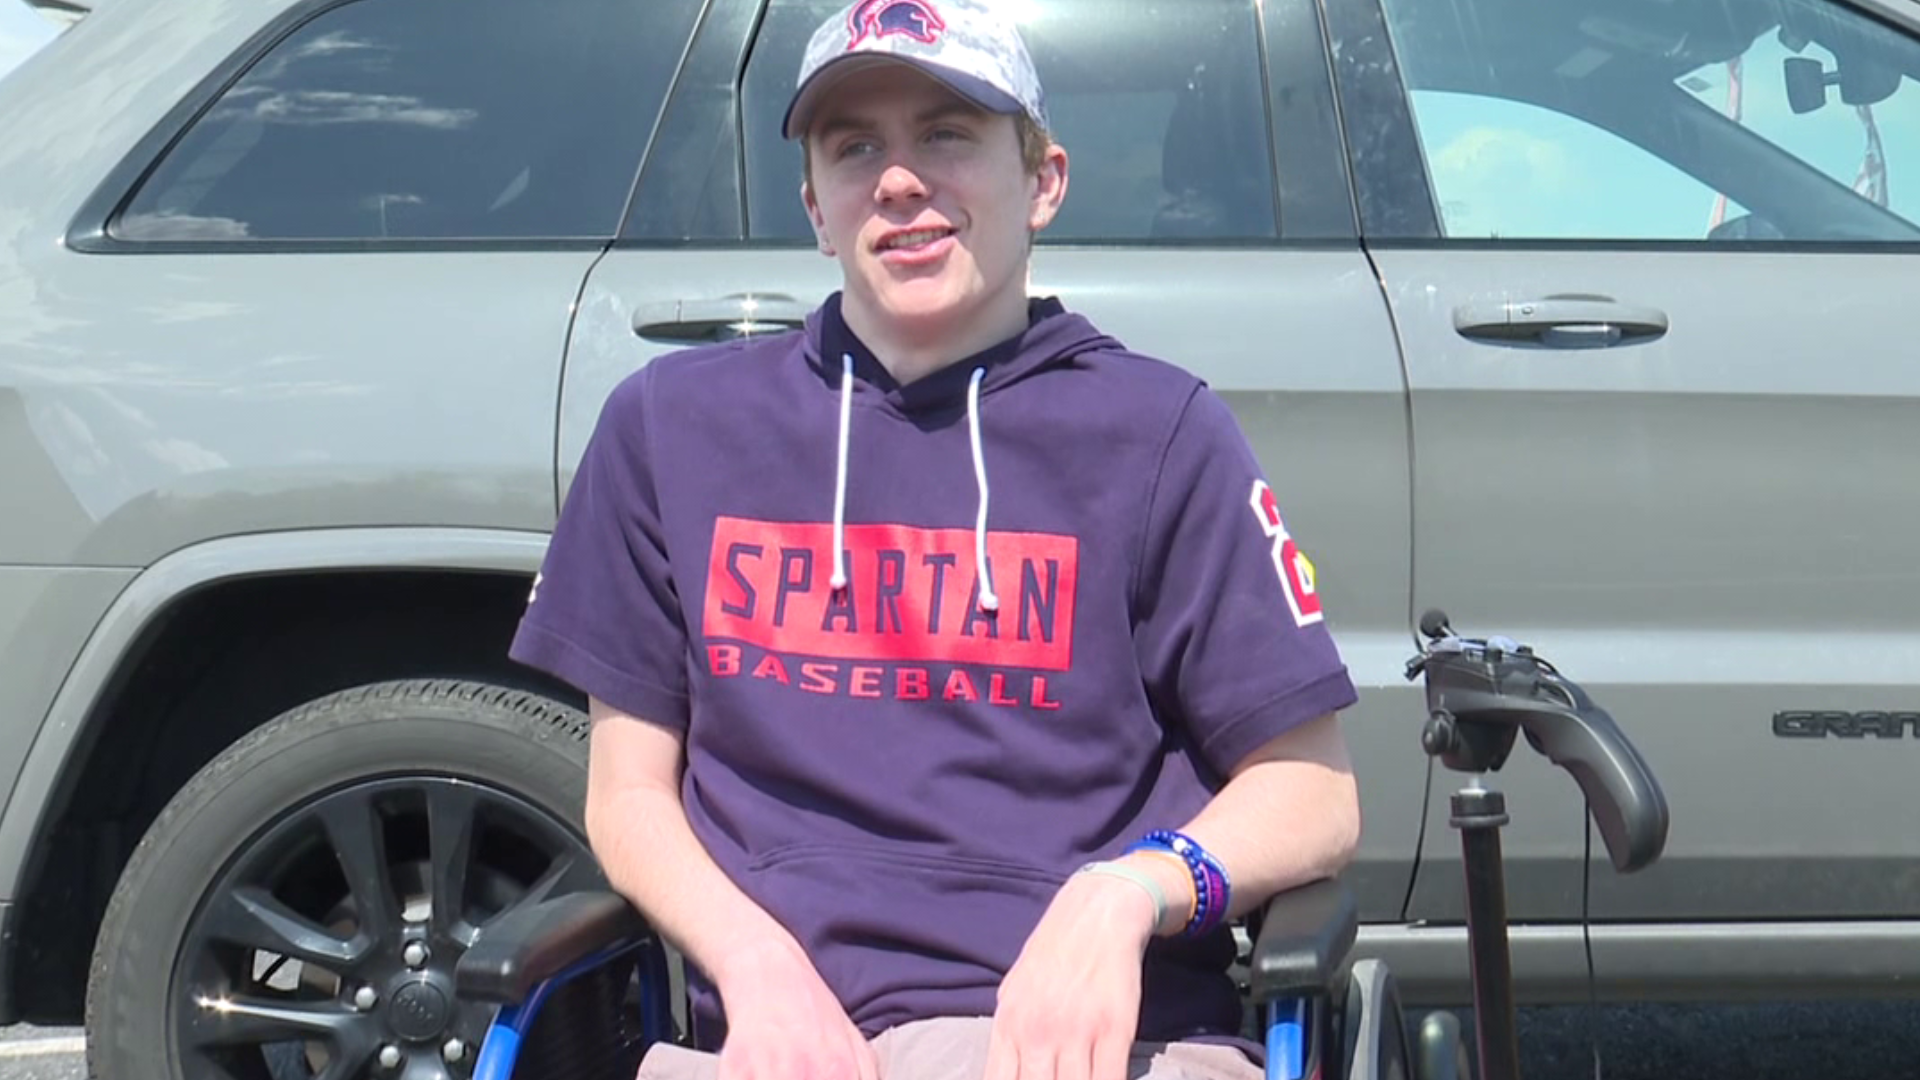 The North Schuylkill star athlete continues to get stronger.